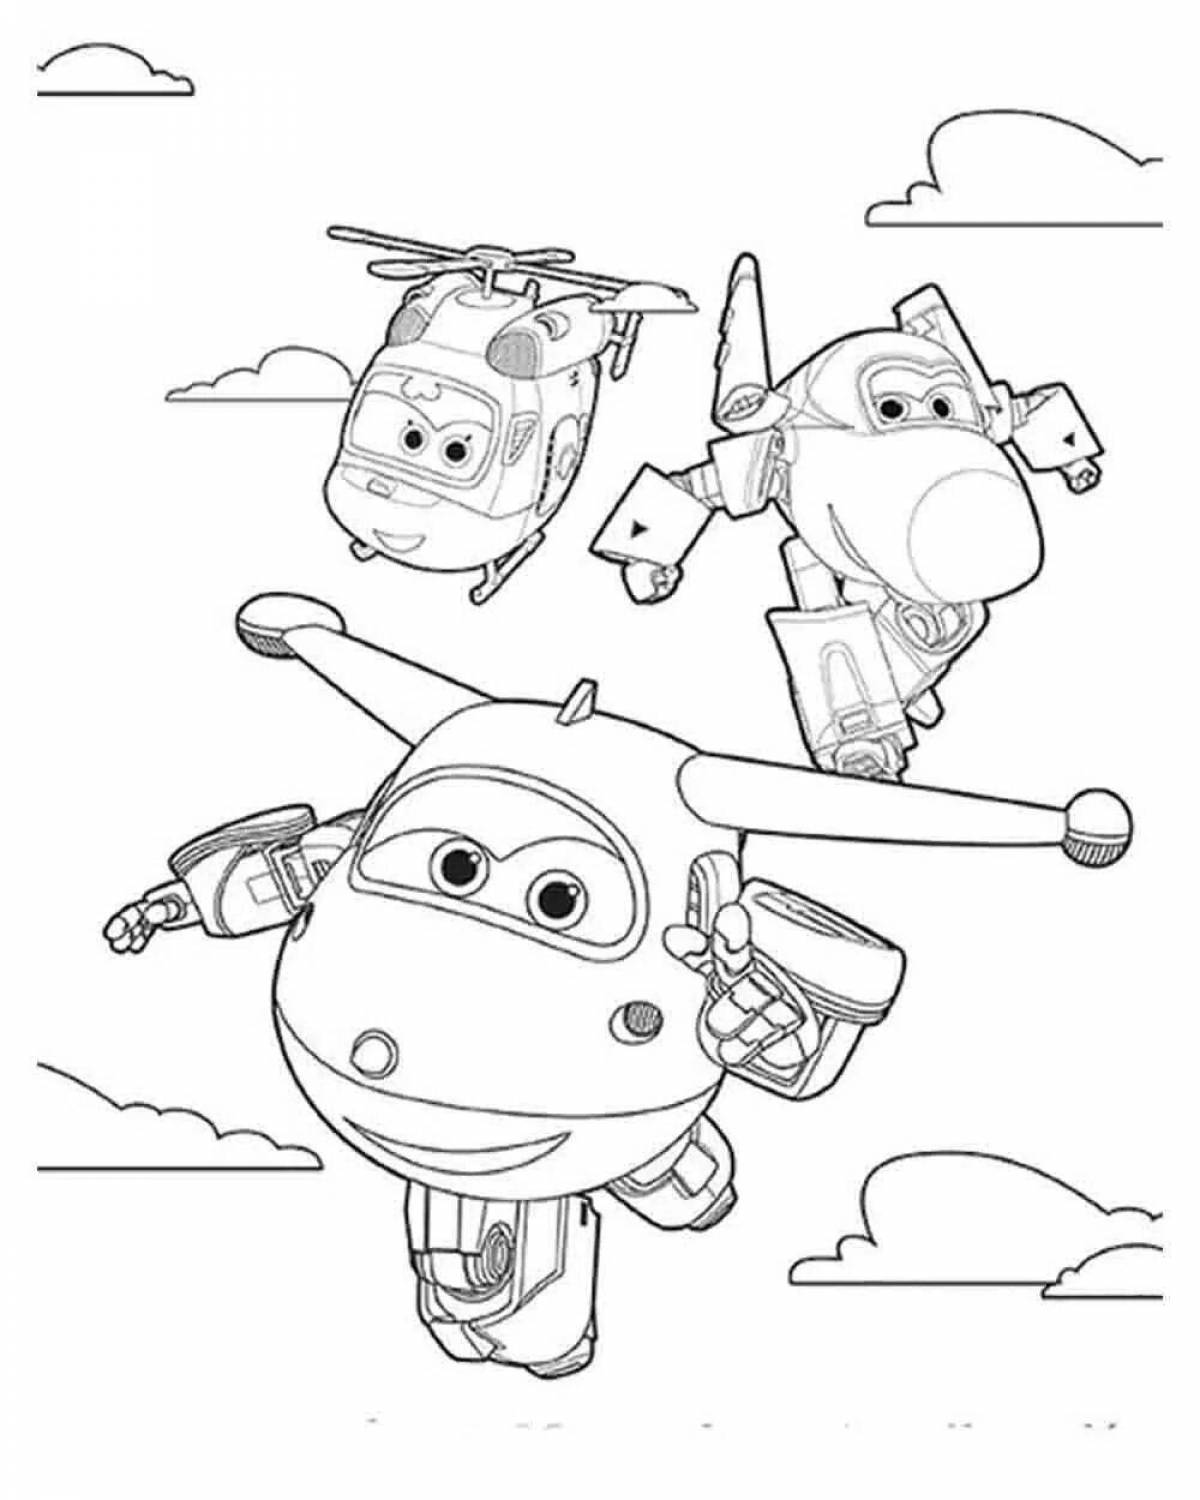 Jett super wings incredible coloring page